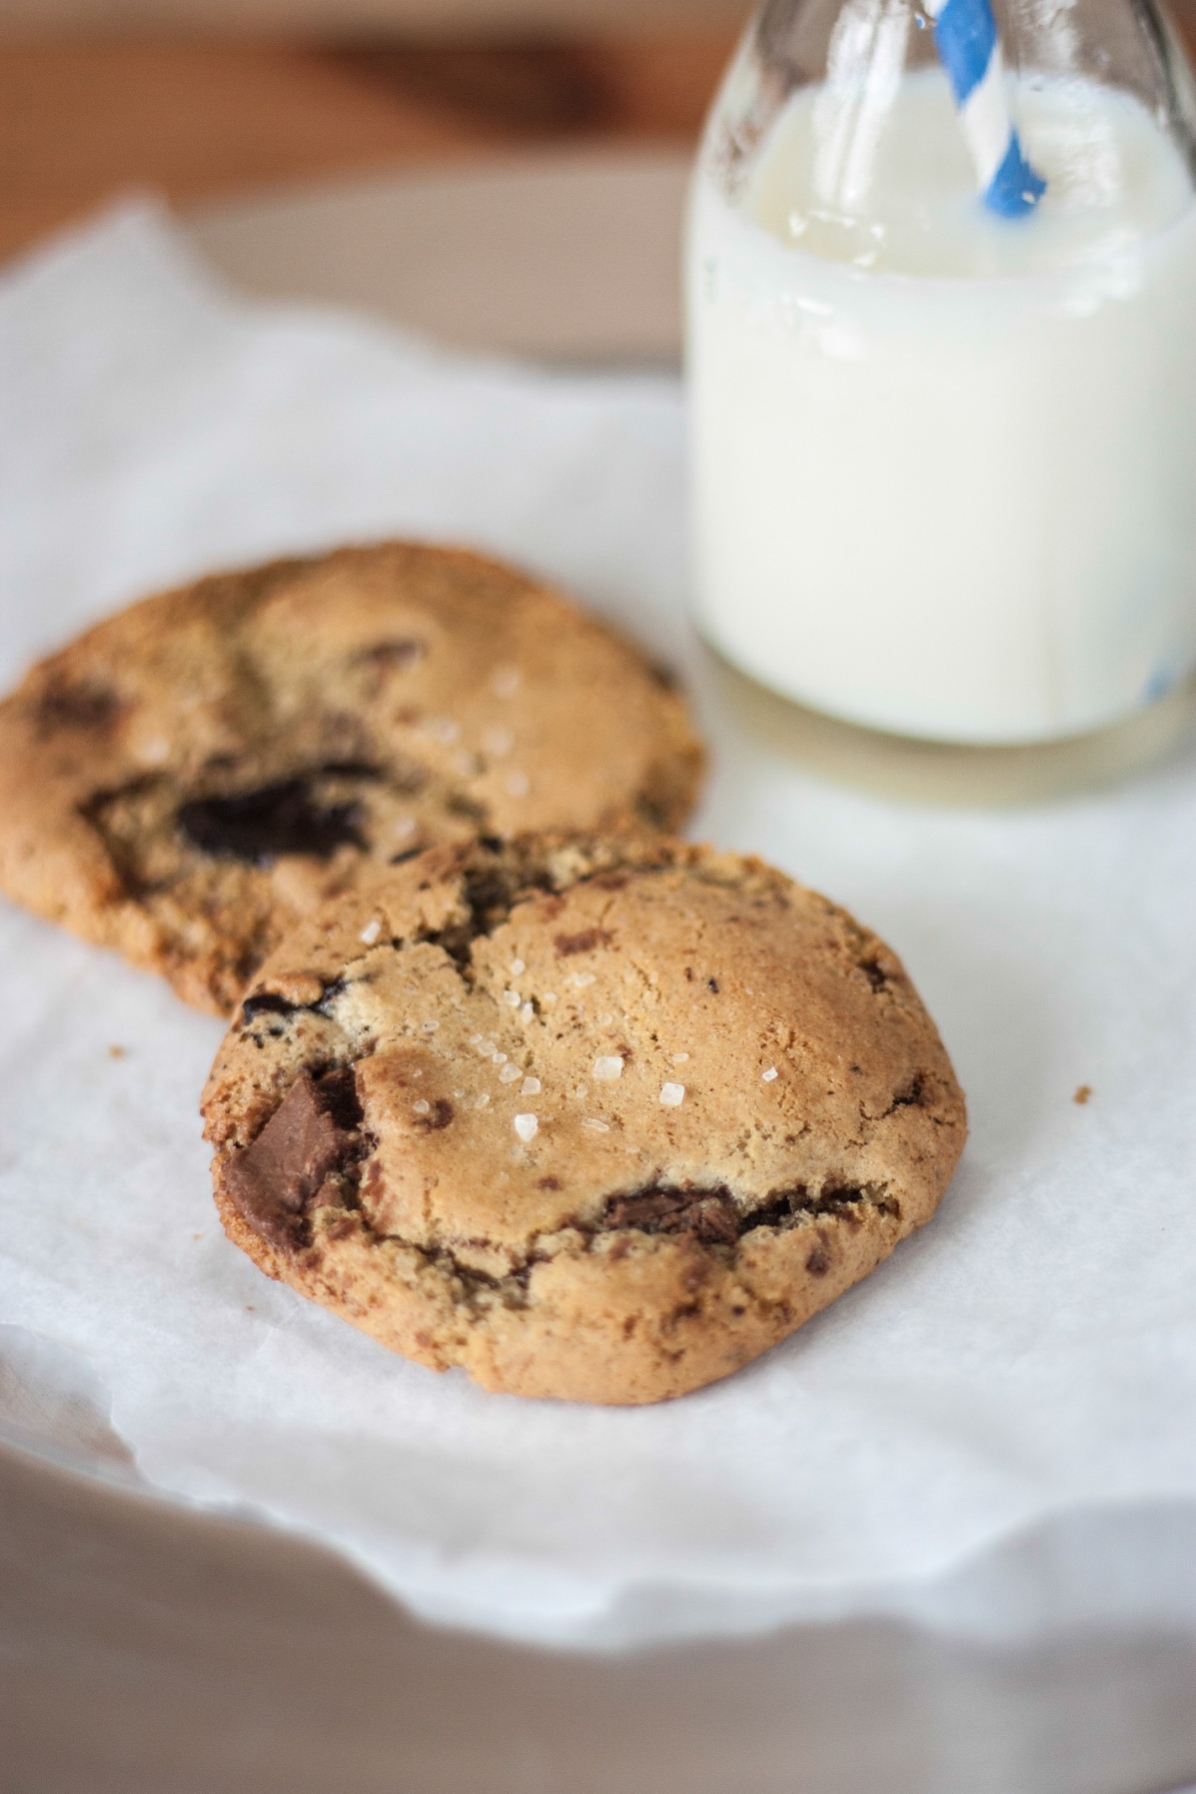 The combo of milk and cookies is the best.